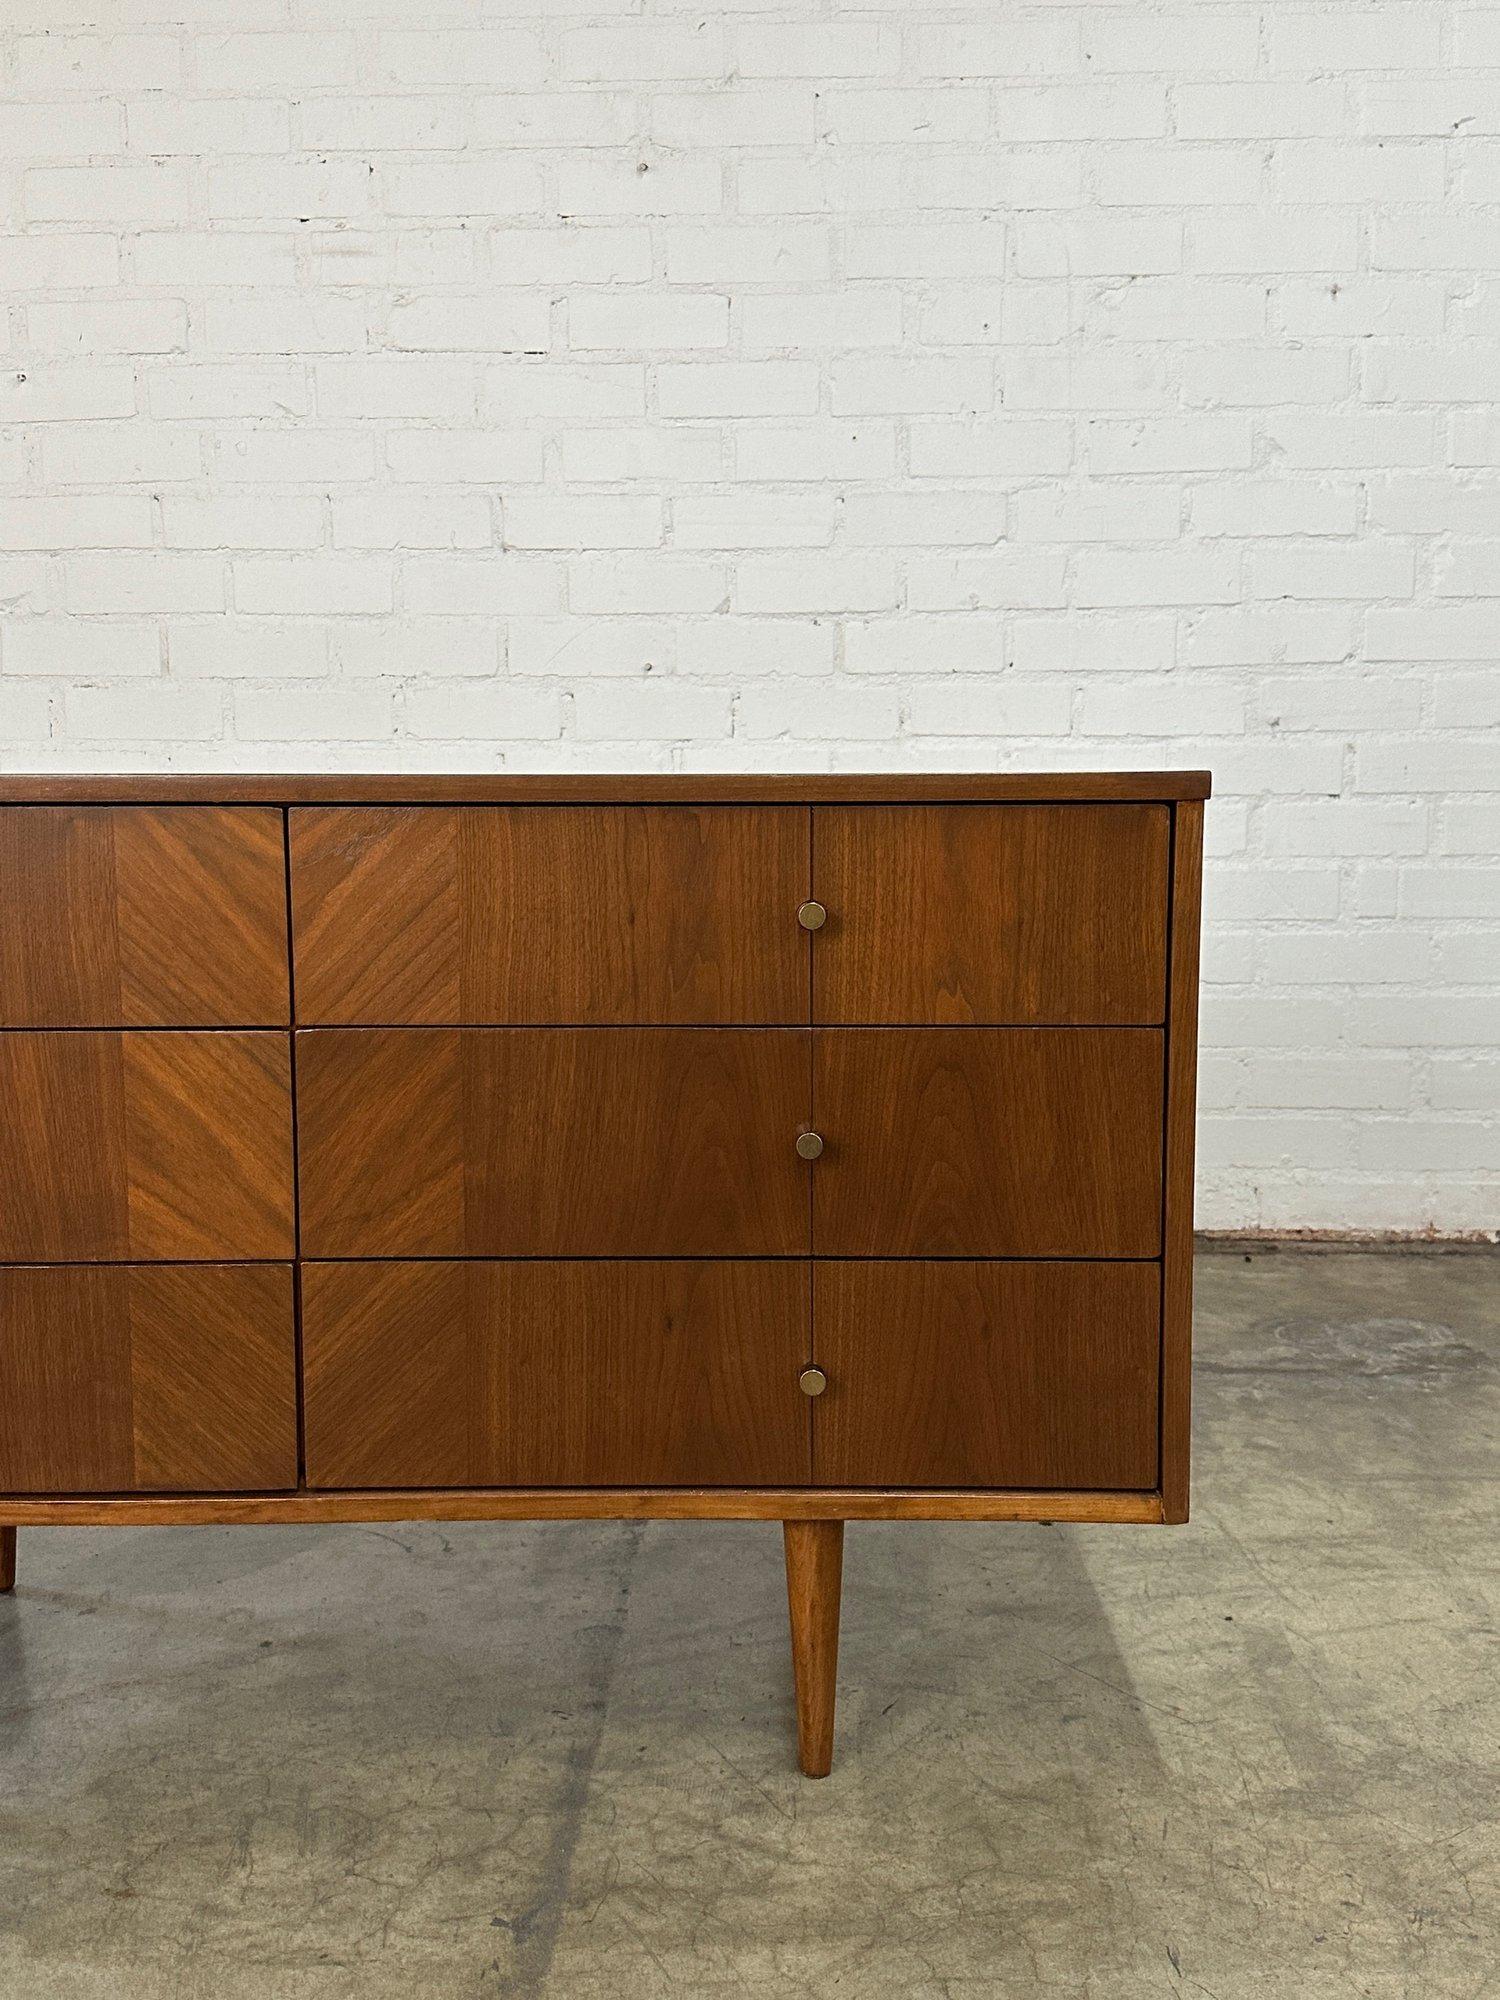 W54 D18 H31.5

Mid Century Dresser in Walnut. Item has been refinished and shows well with no major areas of wear. Item features inlaid grooves and sits on tapered legs. 